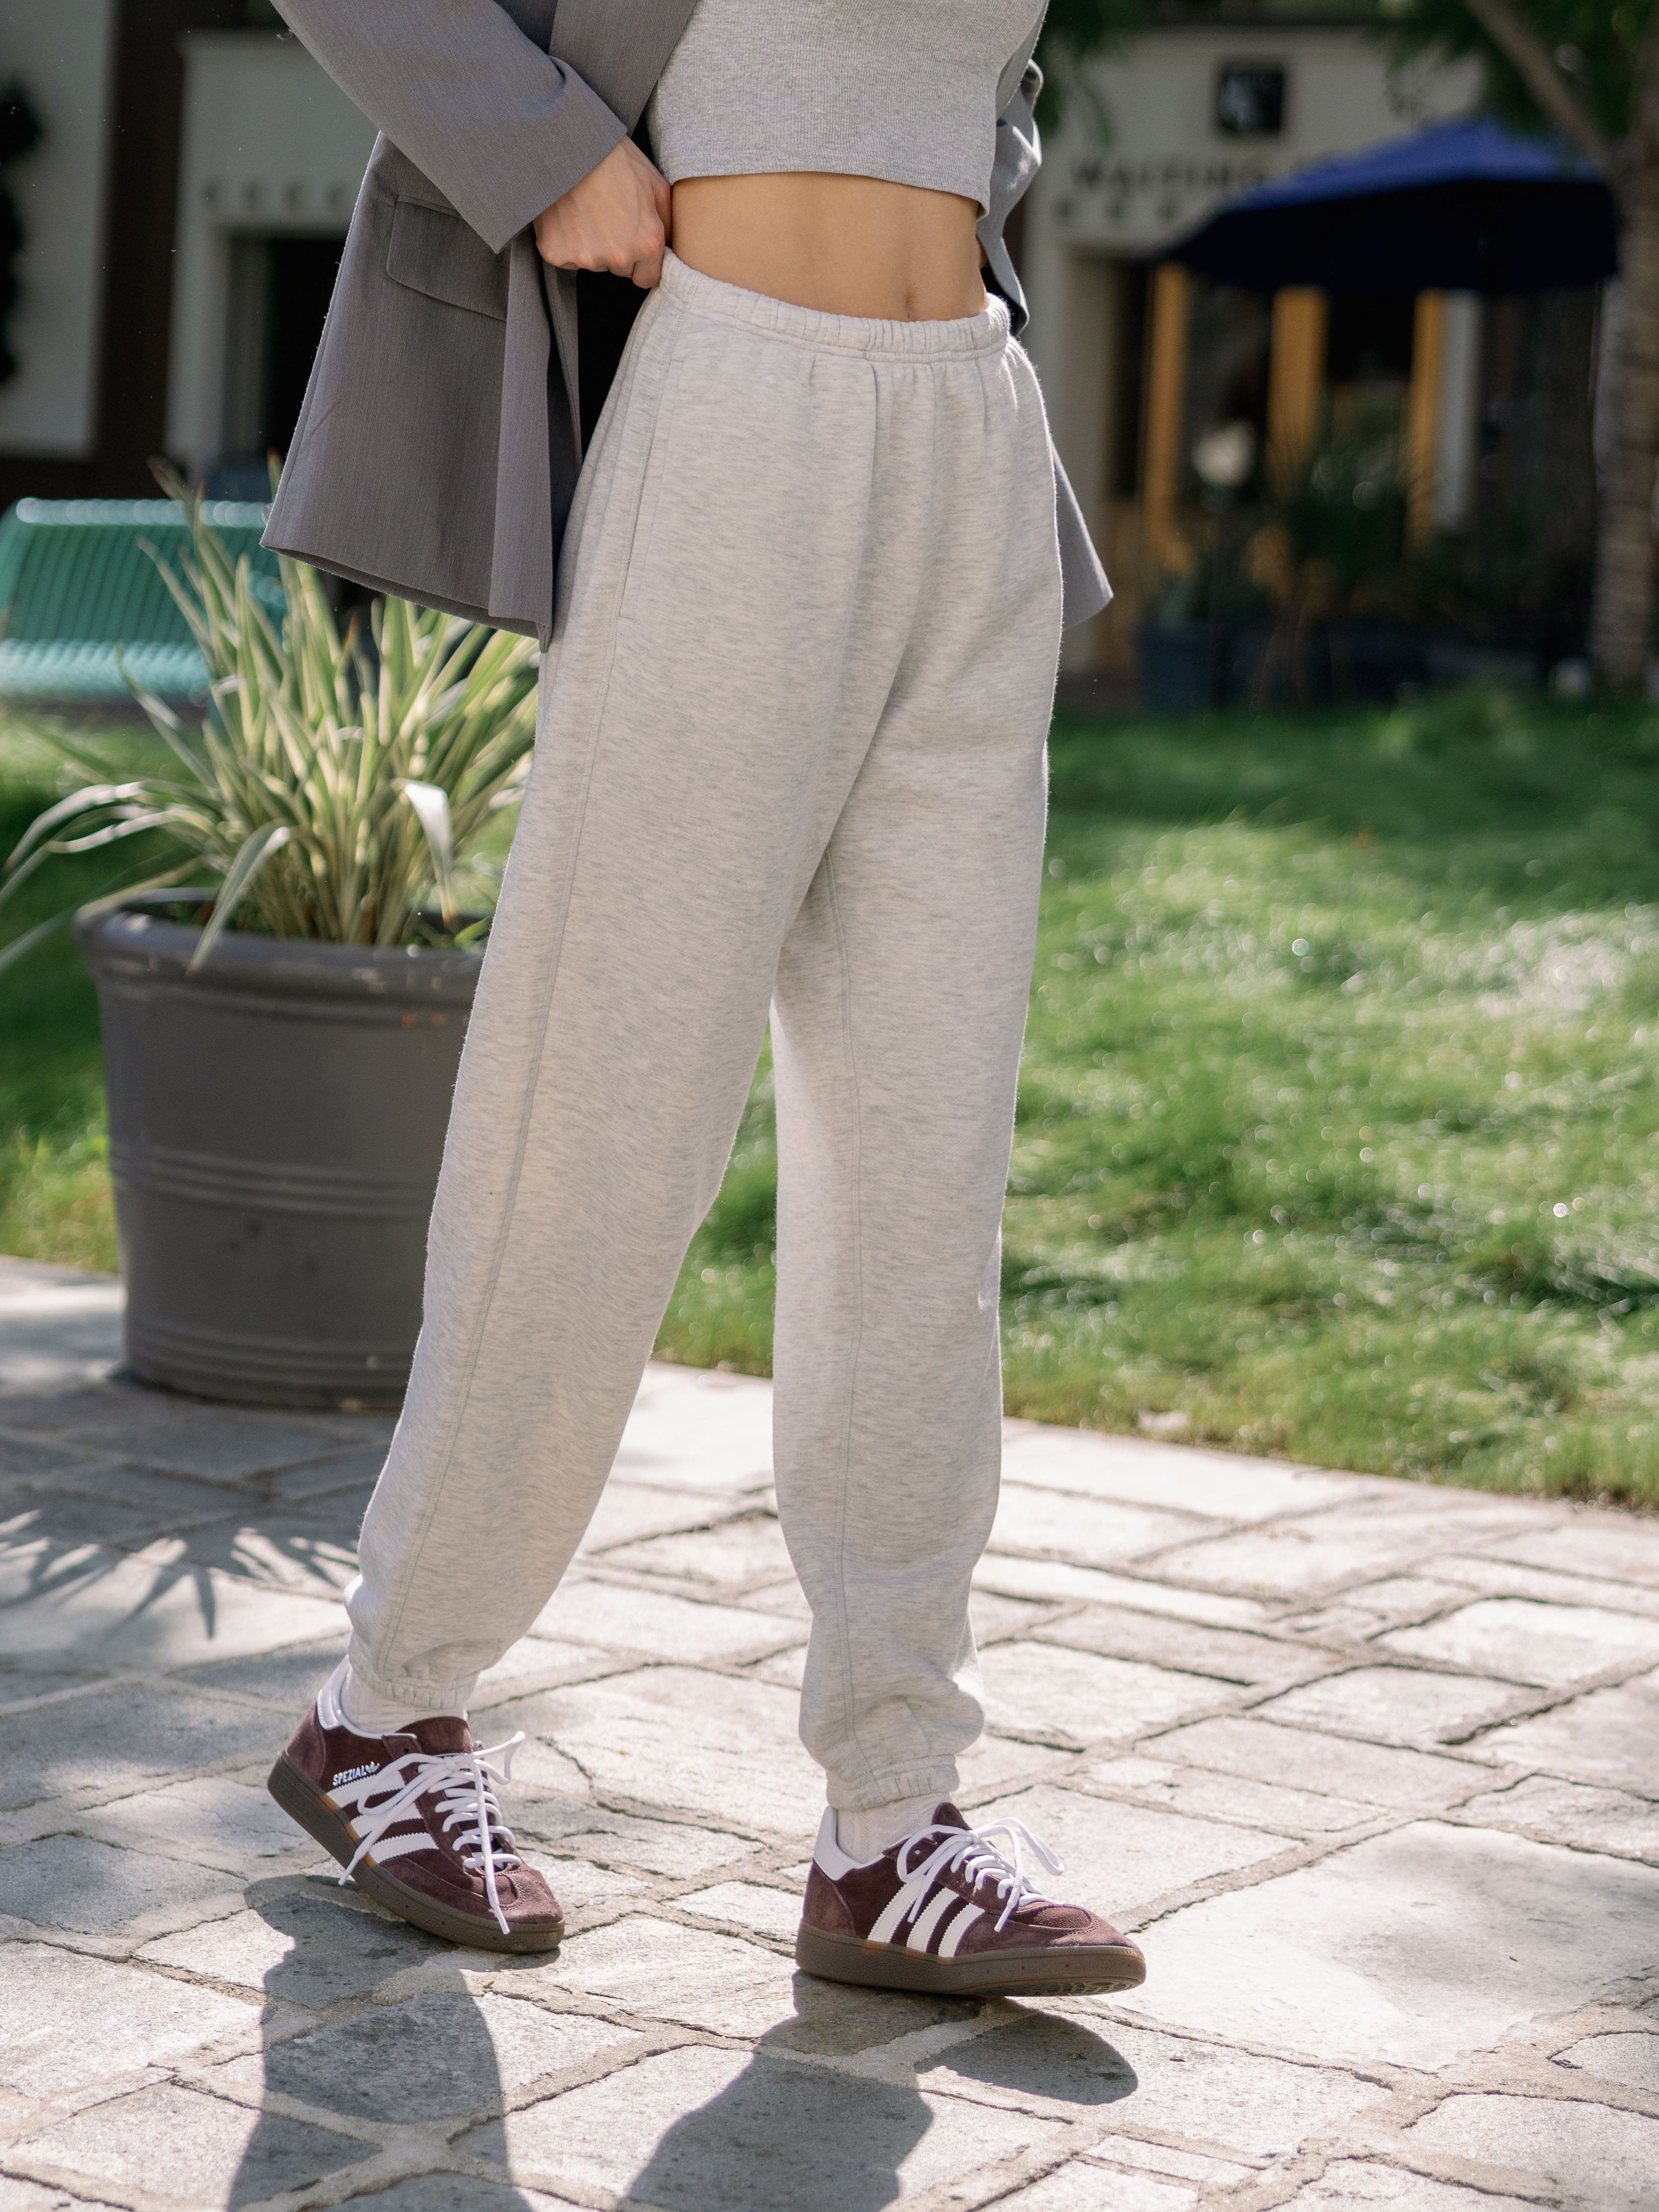 Heather Grey CityScape Joggers. The Joggers are being worn by a female model. The photo is taken from the waist down with the models hand by the pocket of the joggers. The back ground is the back yard of a home. |Color:Heather Grey